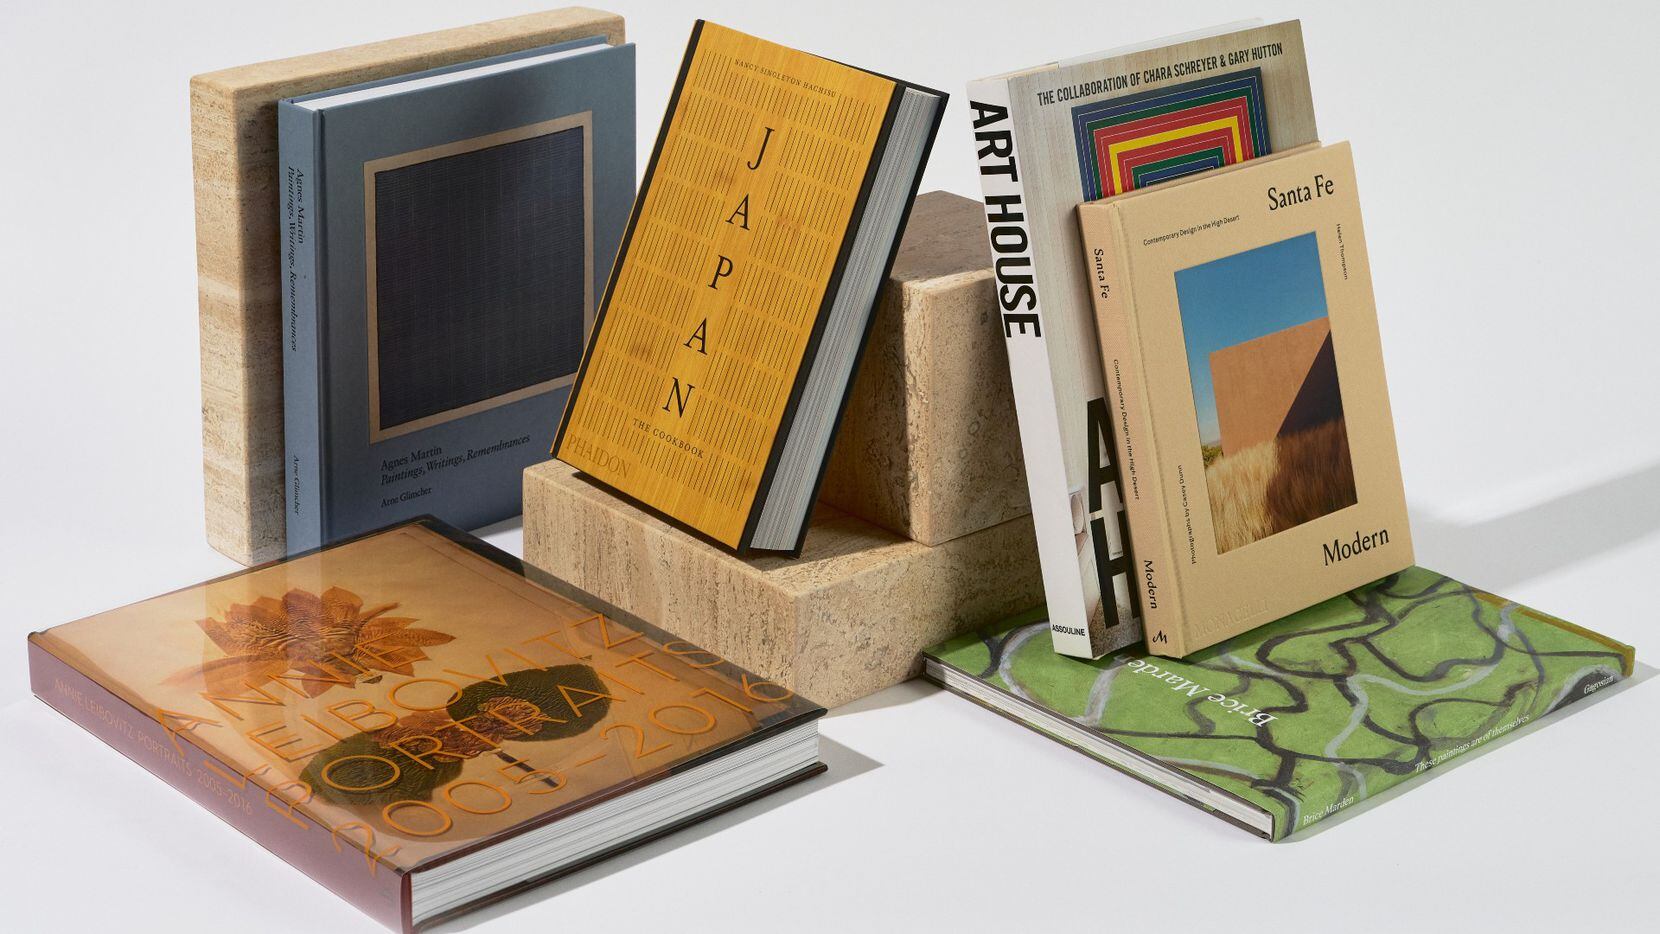 8 Most Expensive Fashion Books for Your Coffee Table (PHOTOS